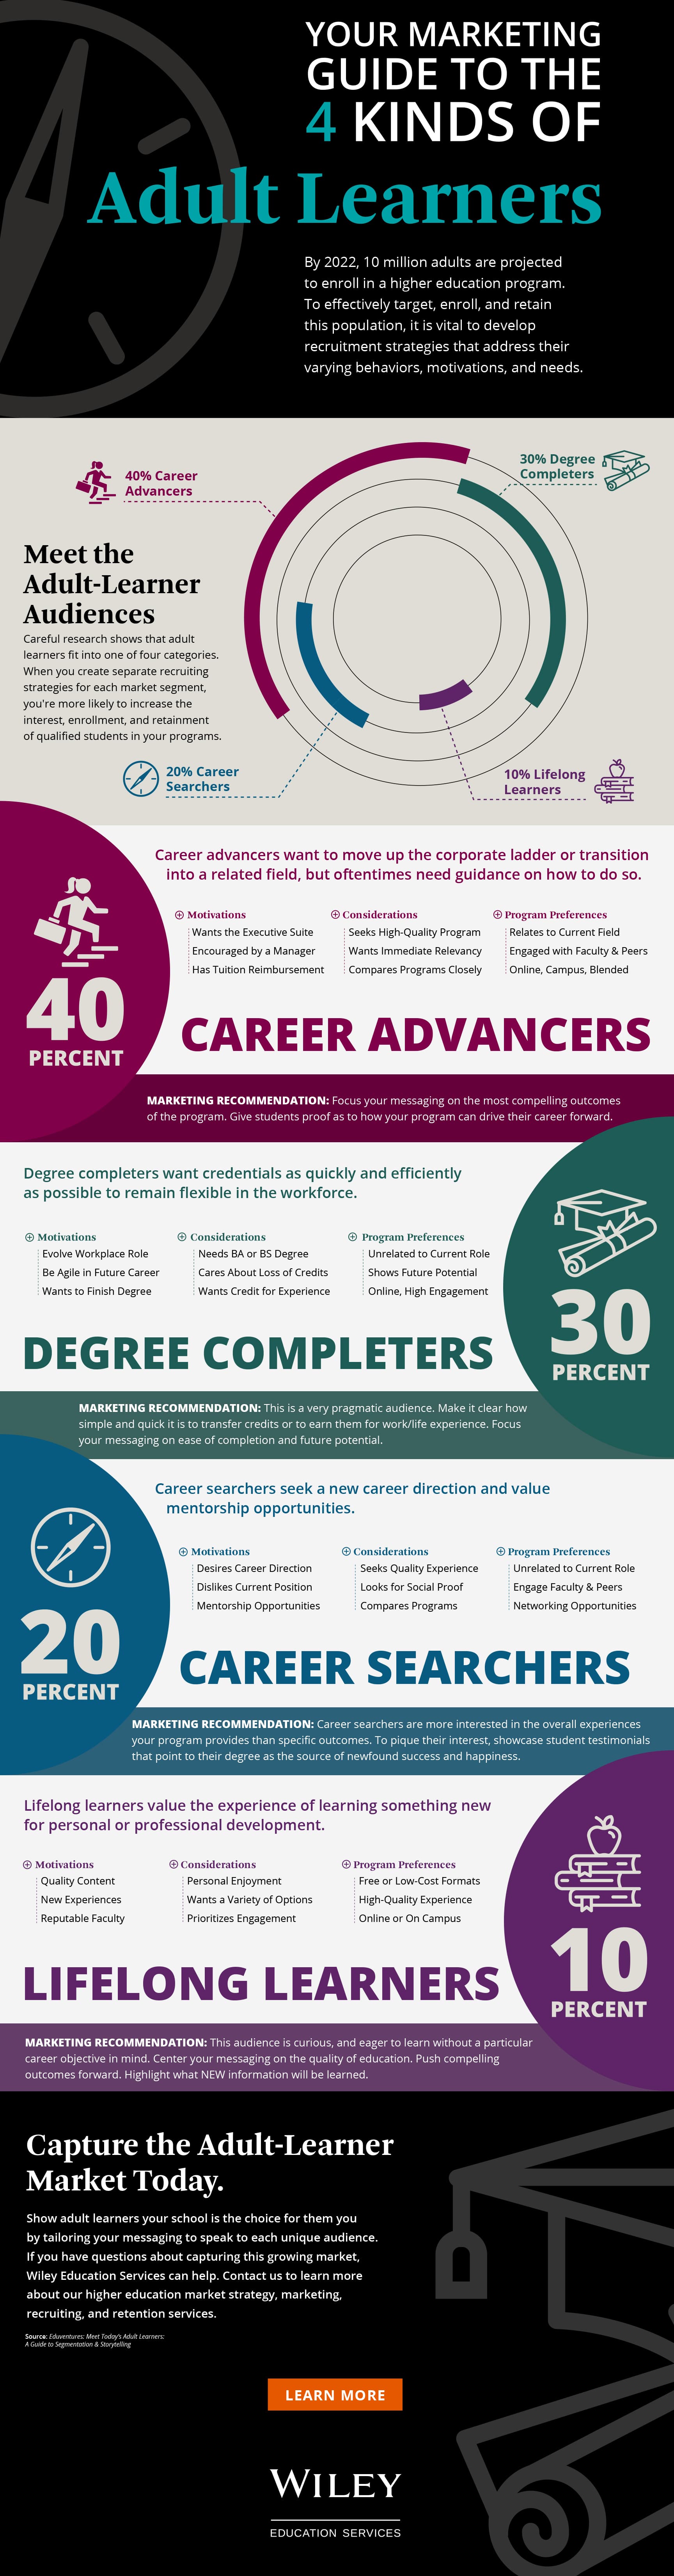 Improve your recruitment strategies by learning about the motivations, behaviors, and needs of the four different populations of adult learners in this infographic.